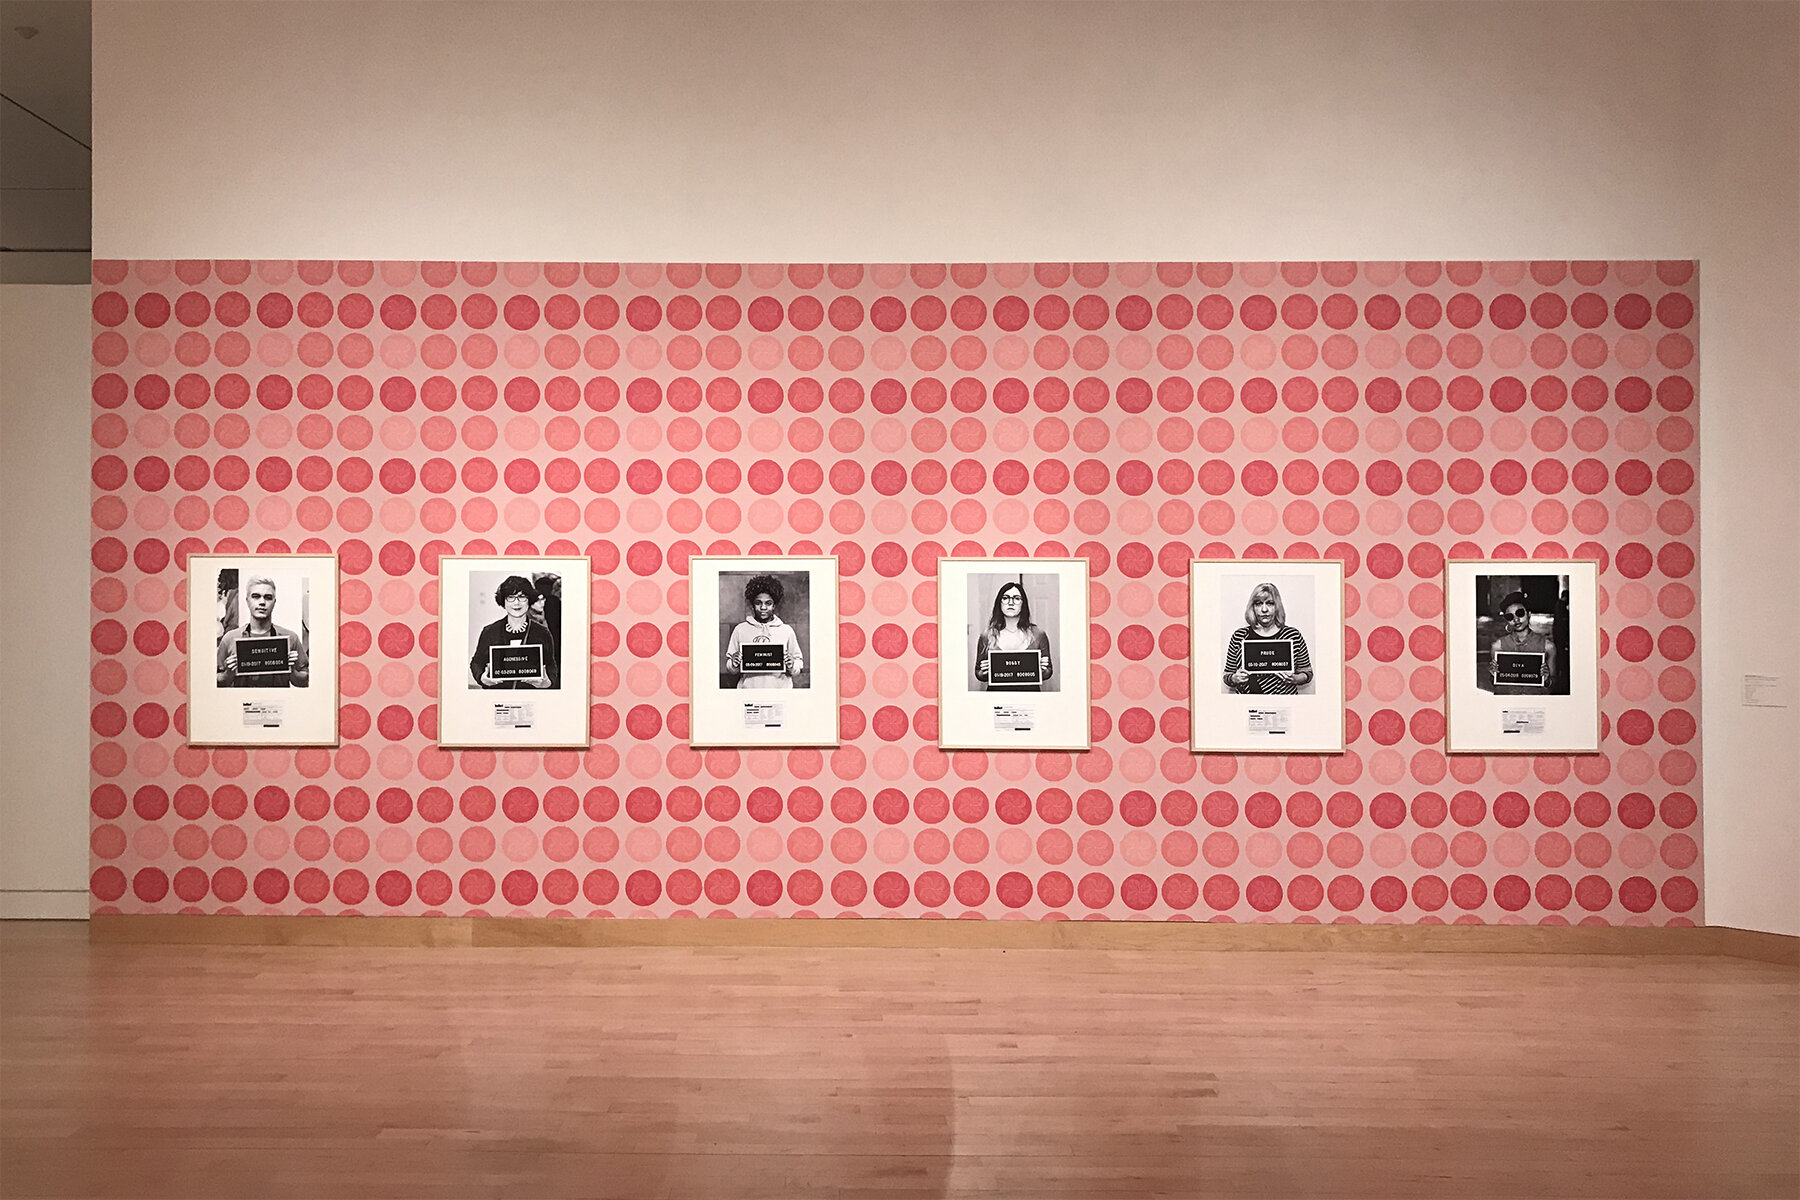  “High Maintenance” from  The Patterns' Vicious Influence &nbsp;installed along with ephemera from our project  You Have the Right to Remain a ___.   on view in the Wisconsin Triennial at the Madison Museum of Contemporary Art (2019) 